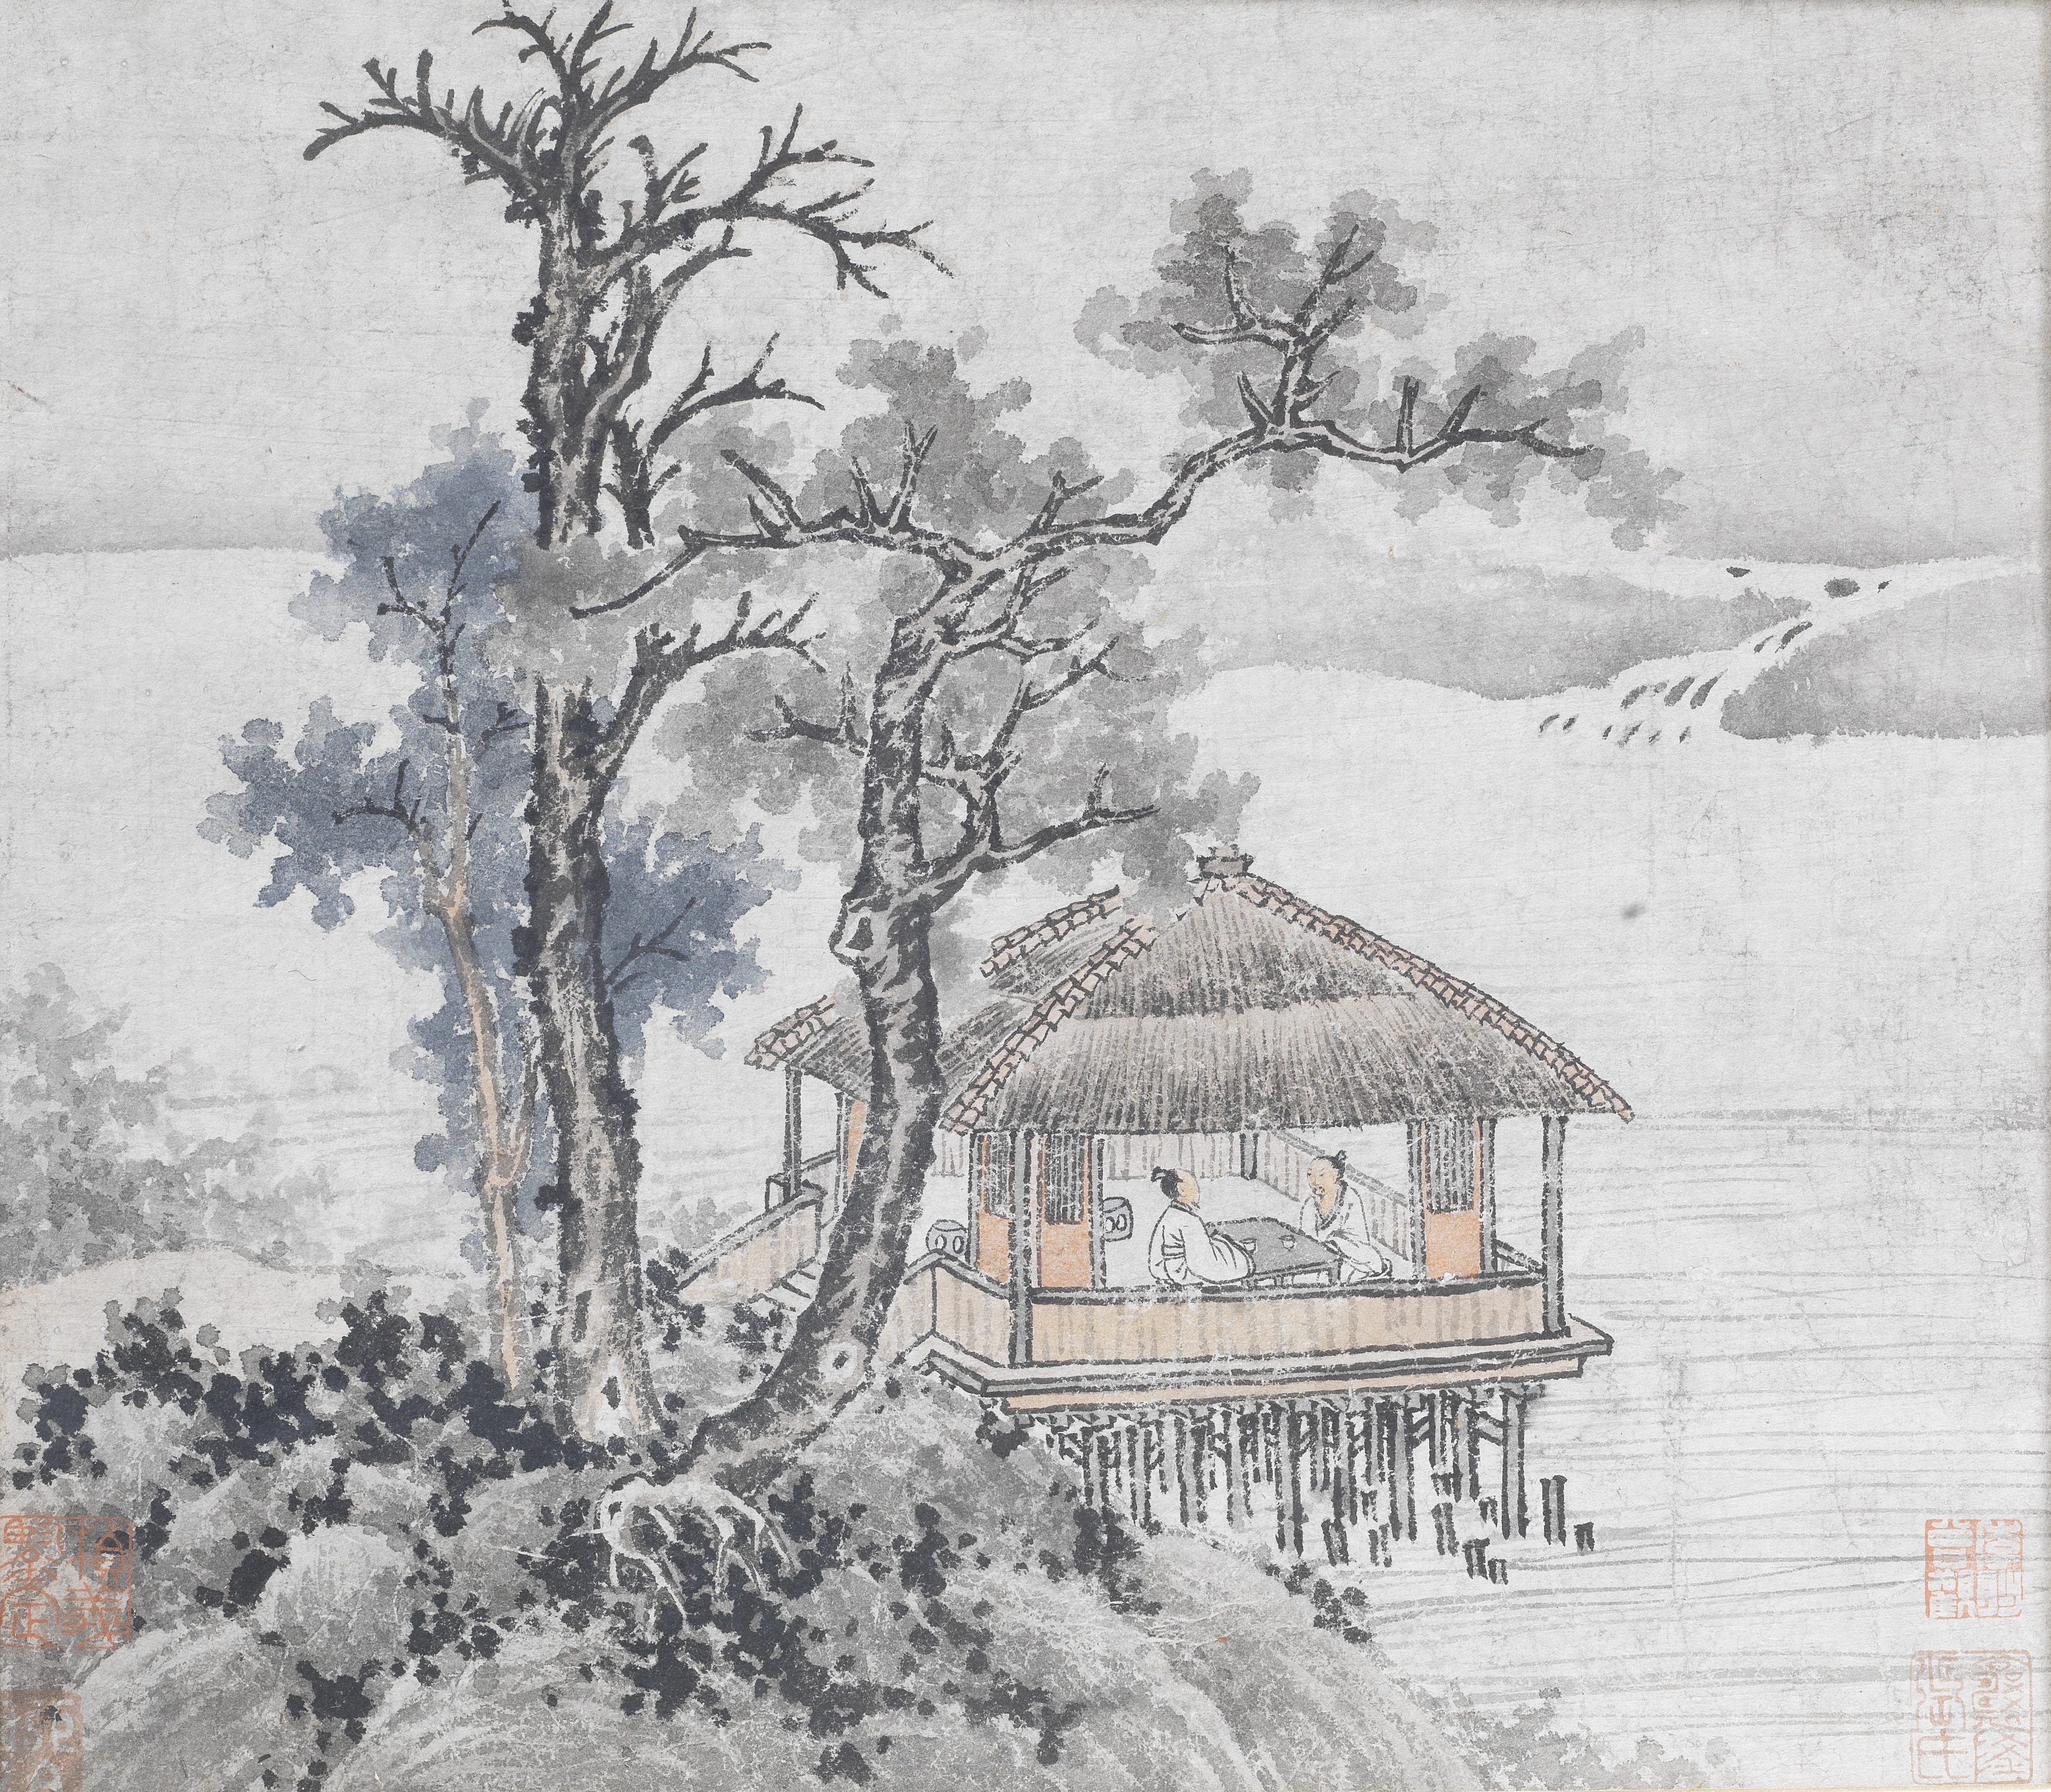 Anonymous Probably Ming DynastyLandscape with Scholars